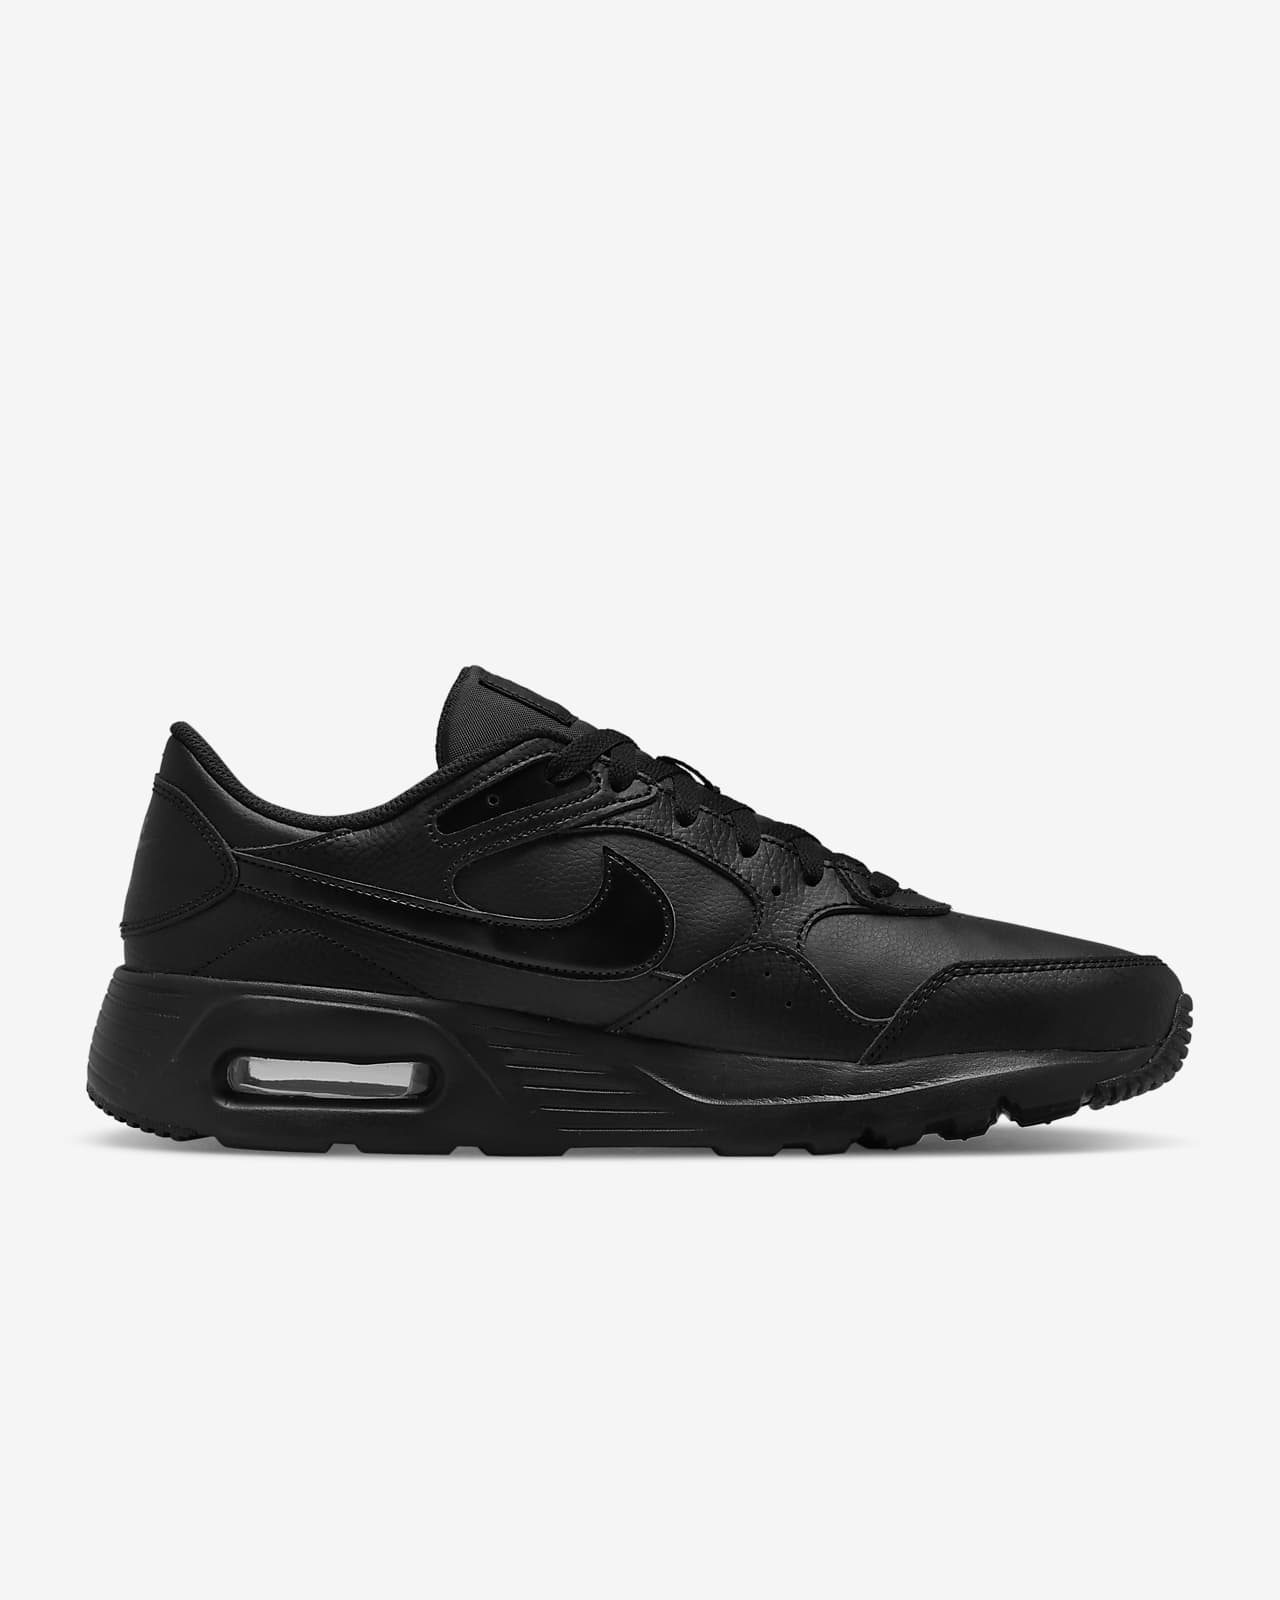 minus delay Planned Nike Air Max SC Leather Men's Shoes. Nike.com